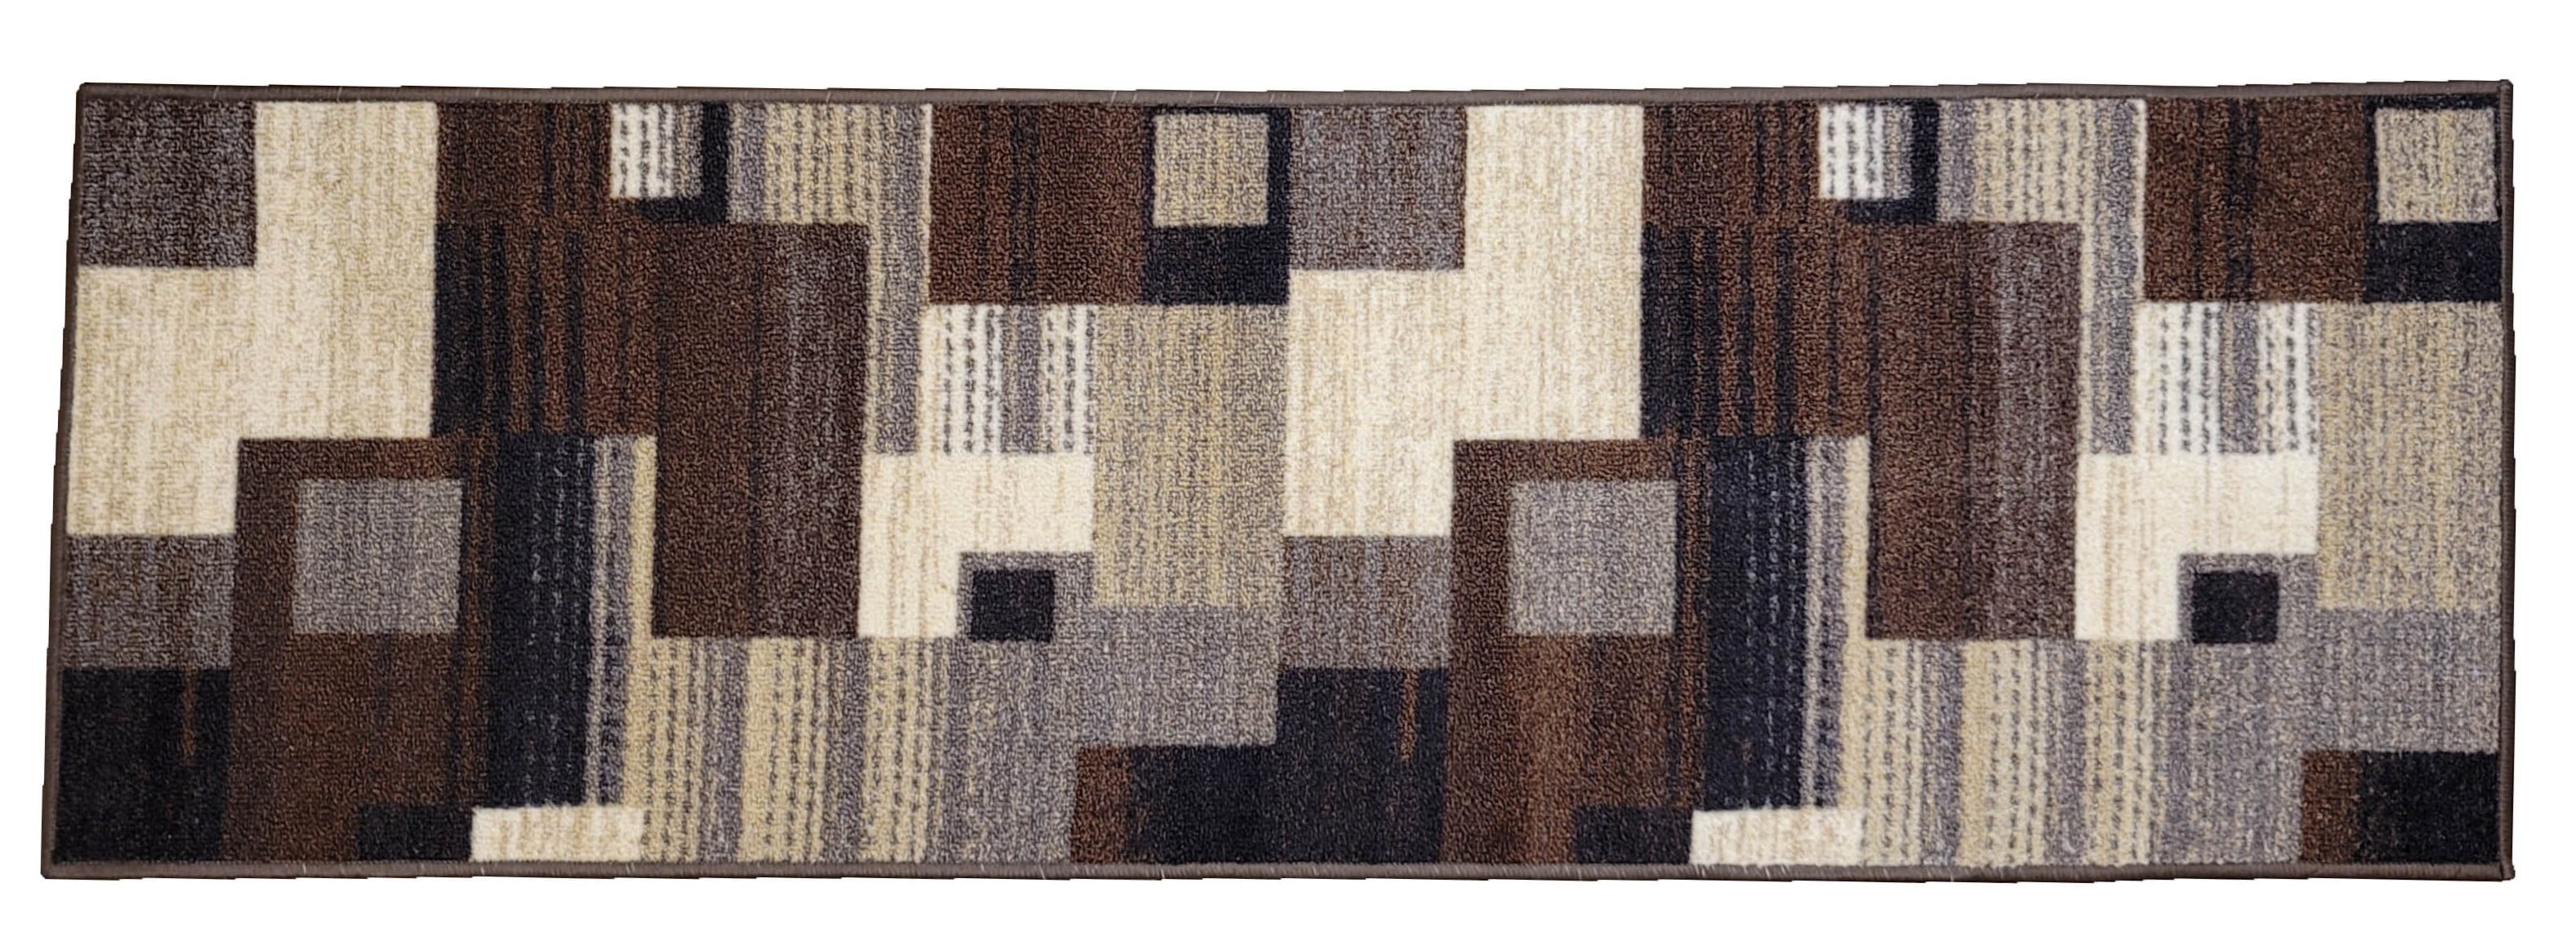 Bordered Non-Skid Low Profile Pile Rubber Backing Kitchen Area Rugs Be –  Discounted-Rugs